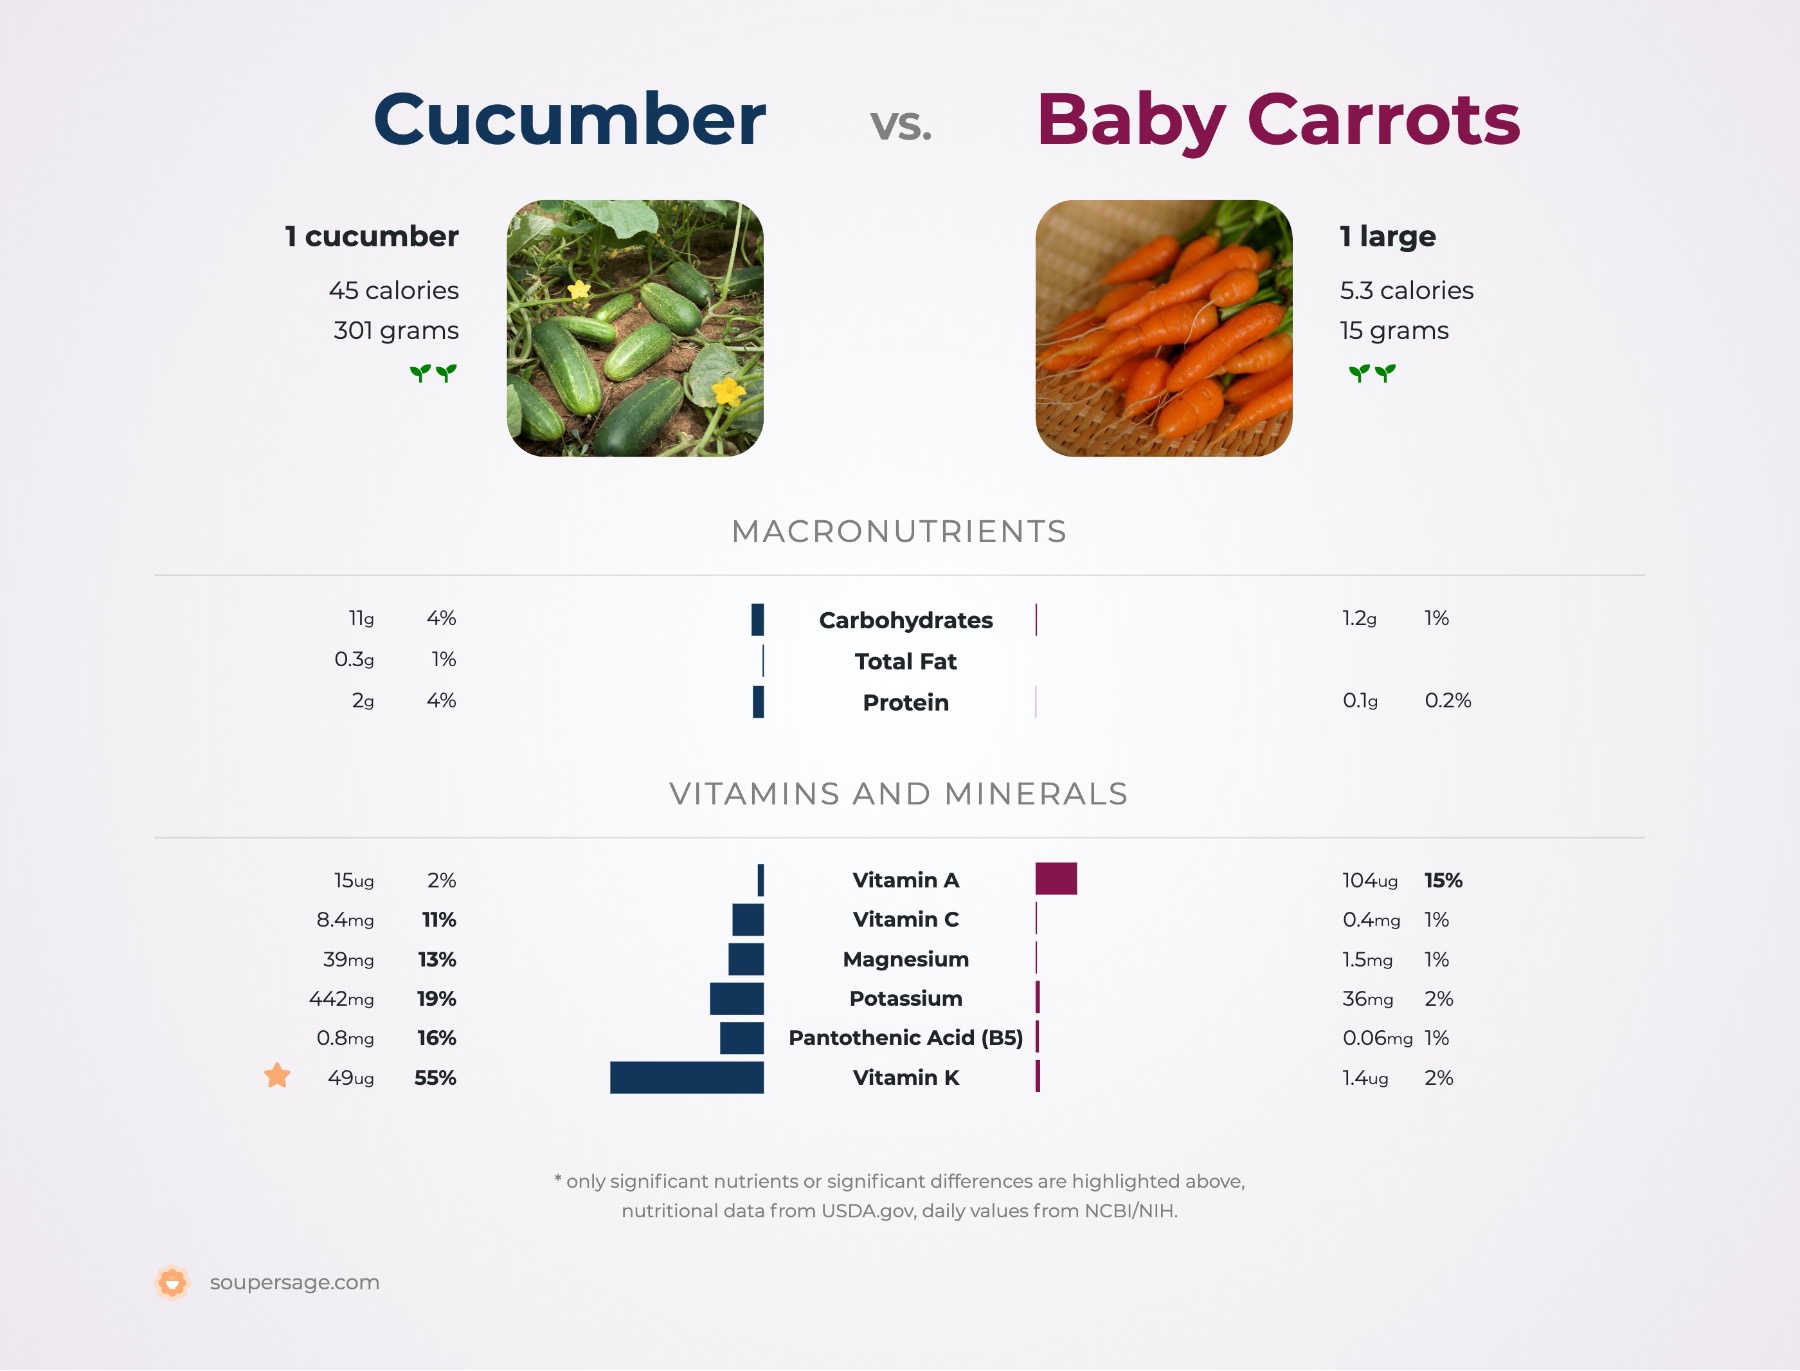 nutrition comparison of baby carrots vs. cucumber